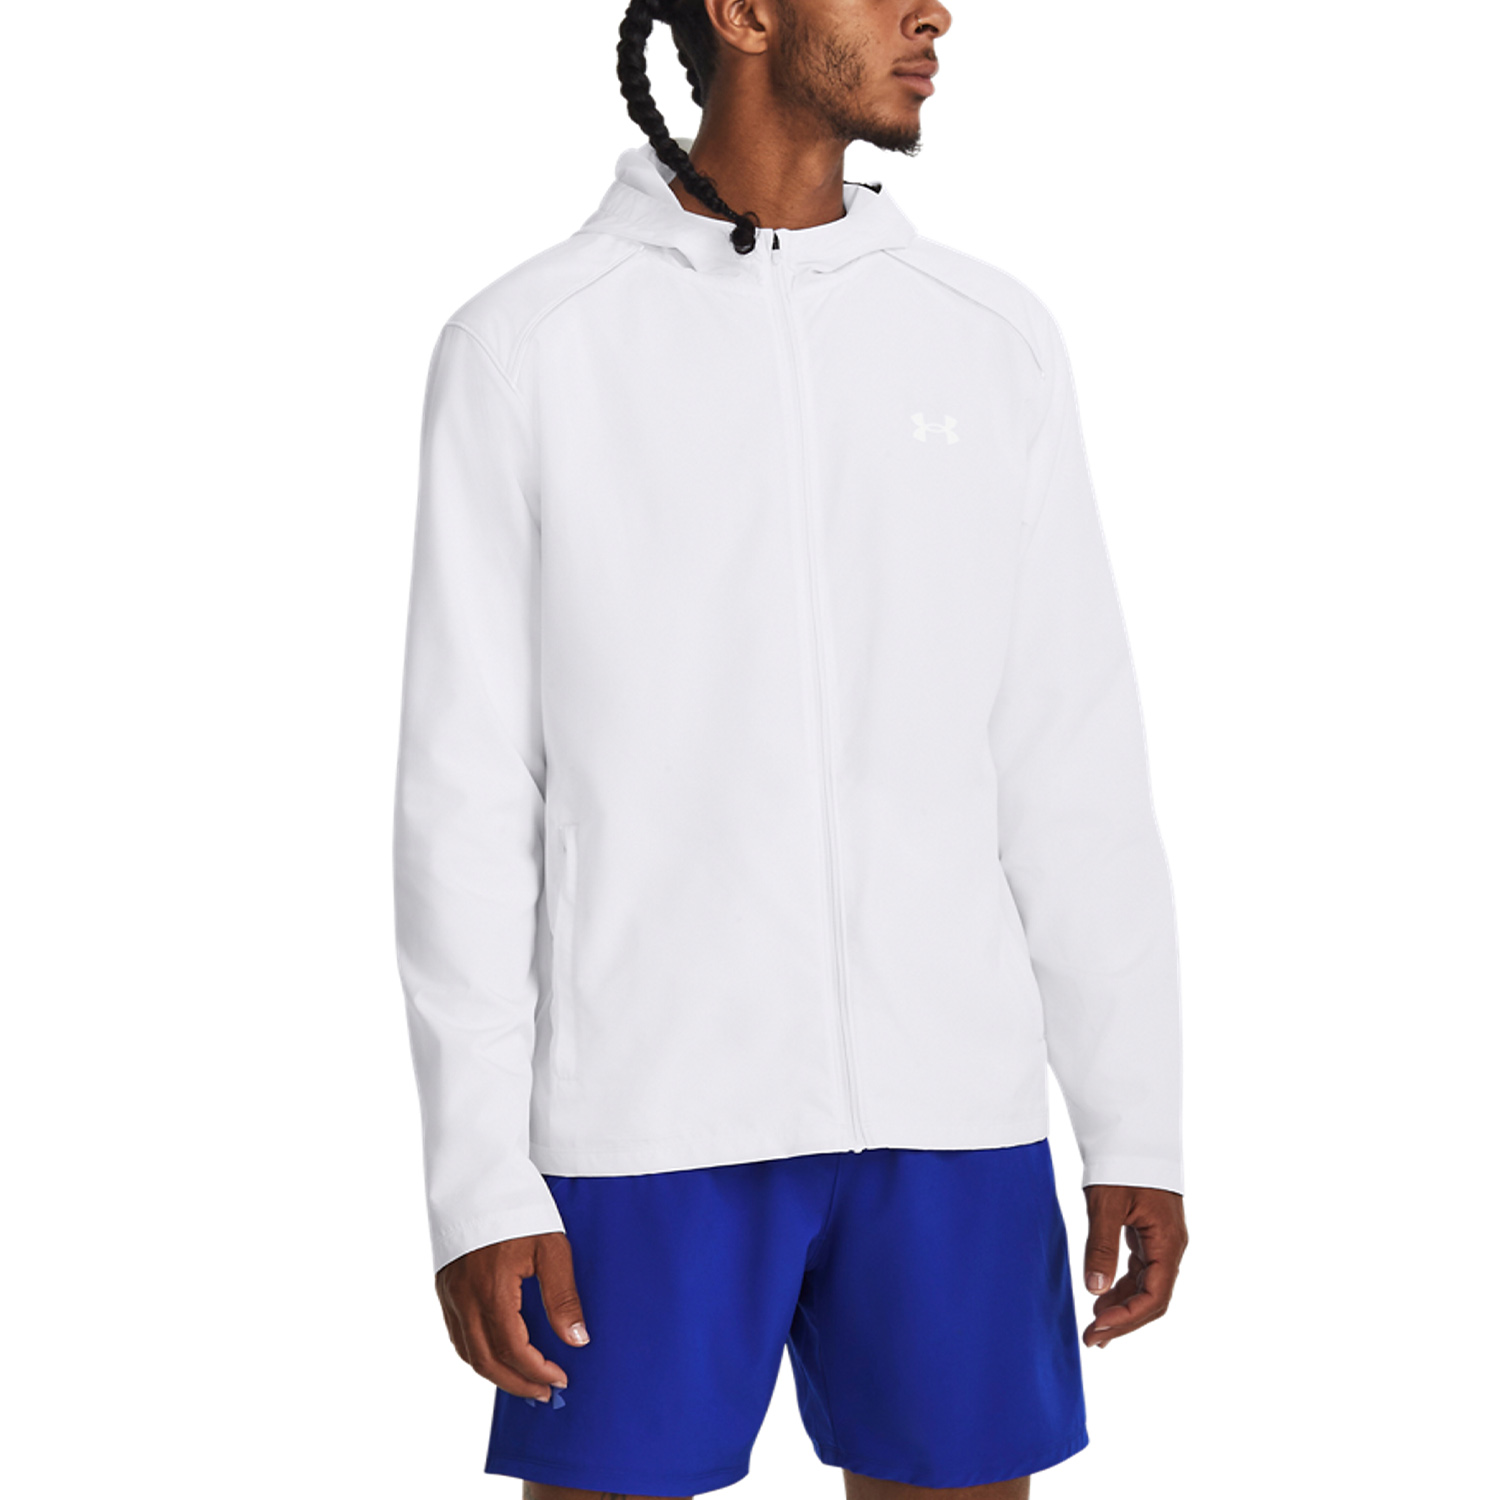 Under Armour Storm Run Giacca - White/Reflective